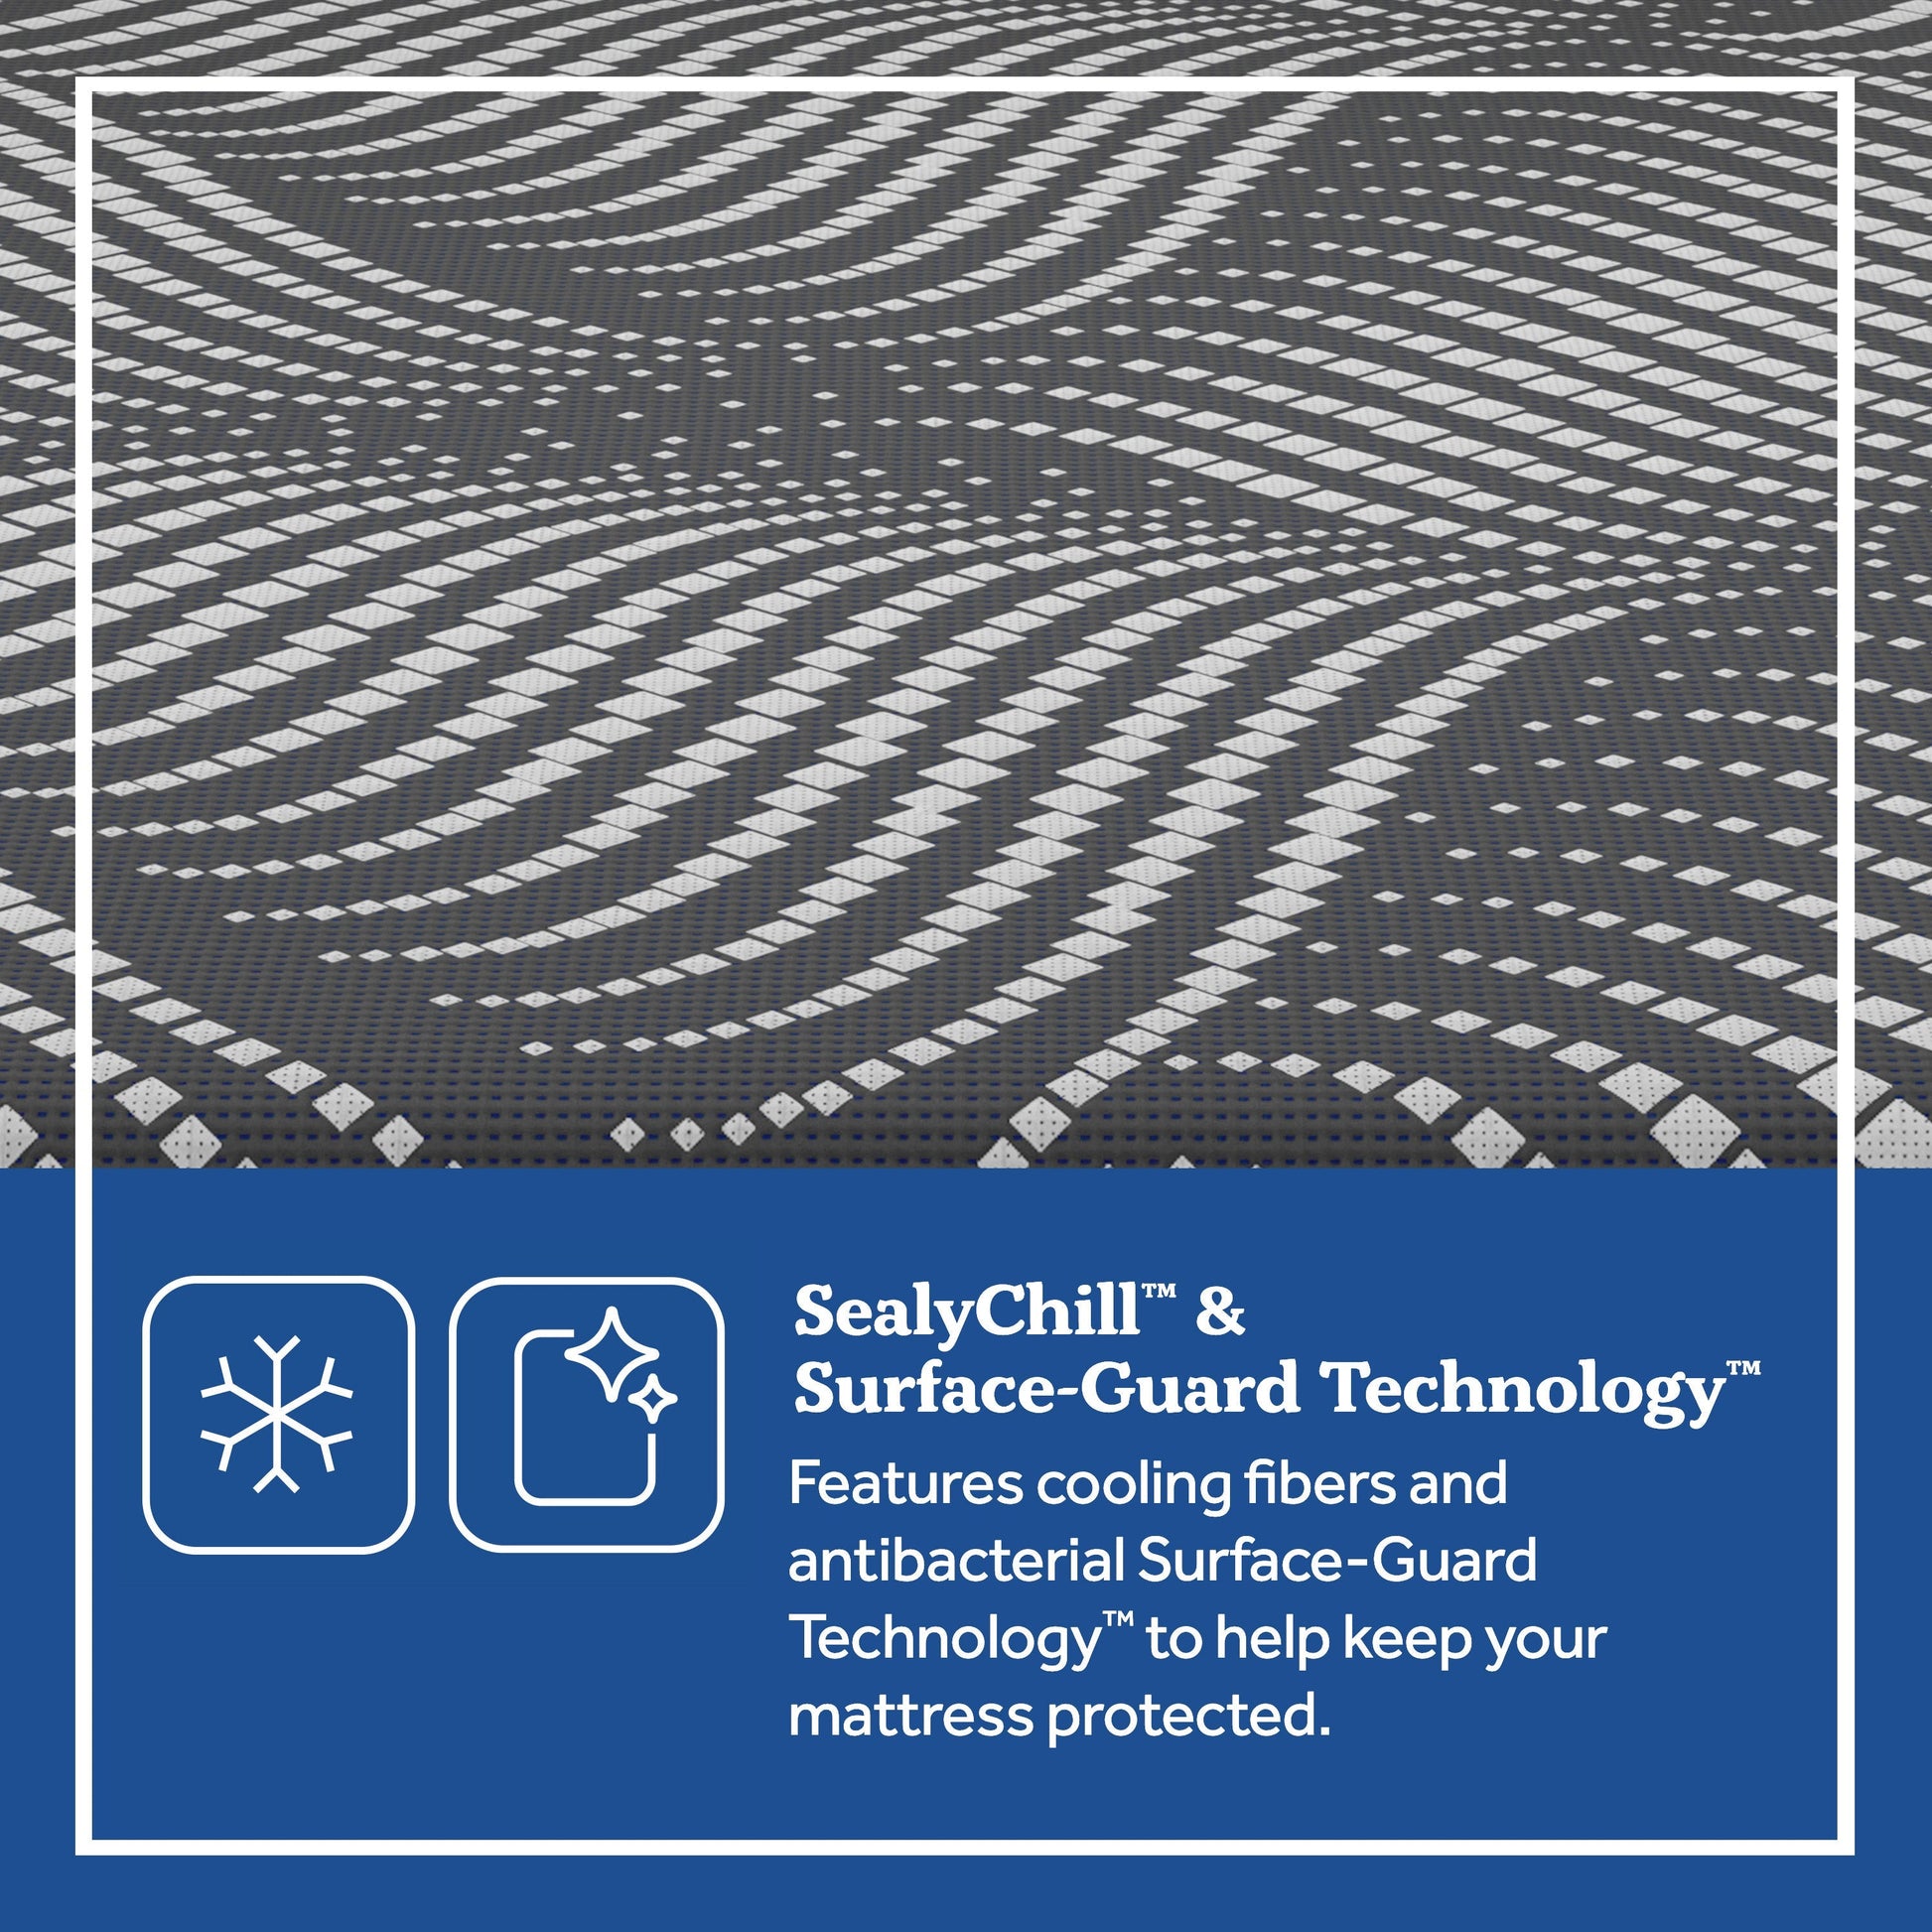 Sealy High Point Soft Hybrid Mattress SealyChill and Surface-Guard Technology badges